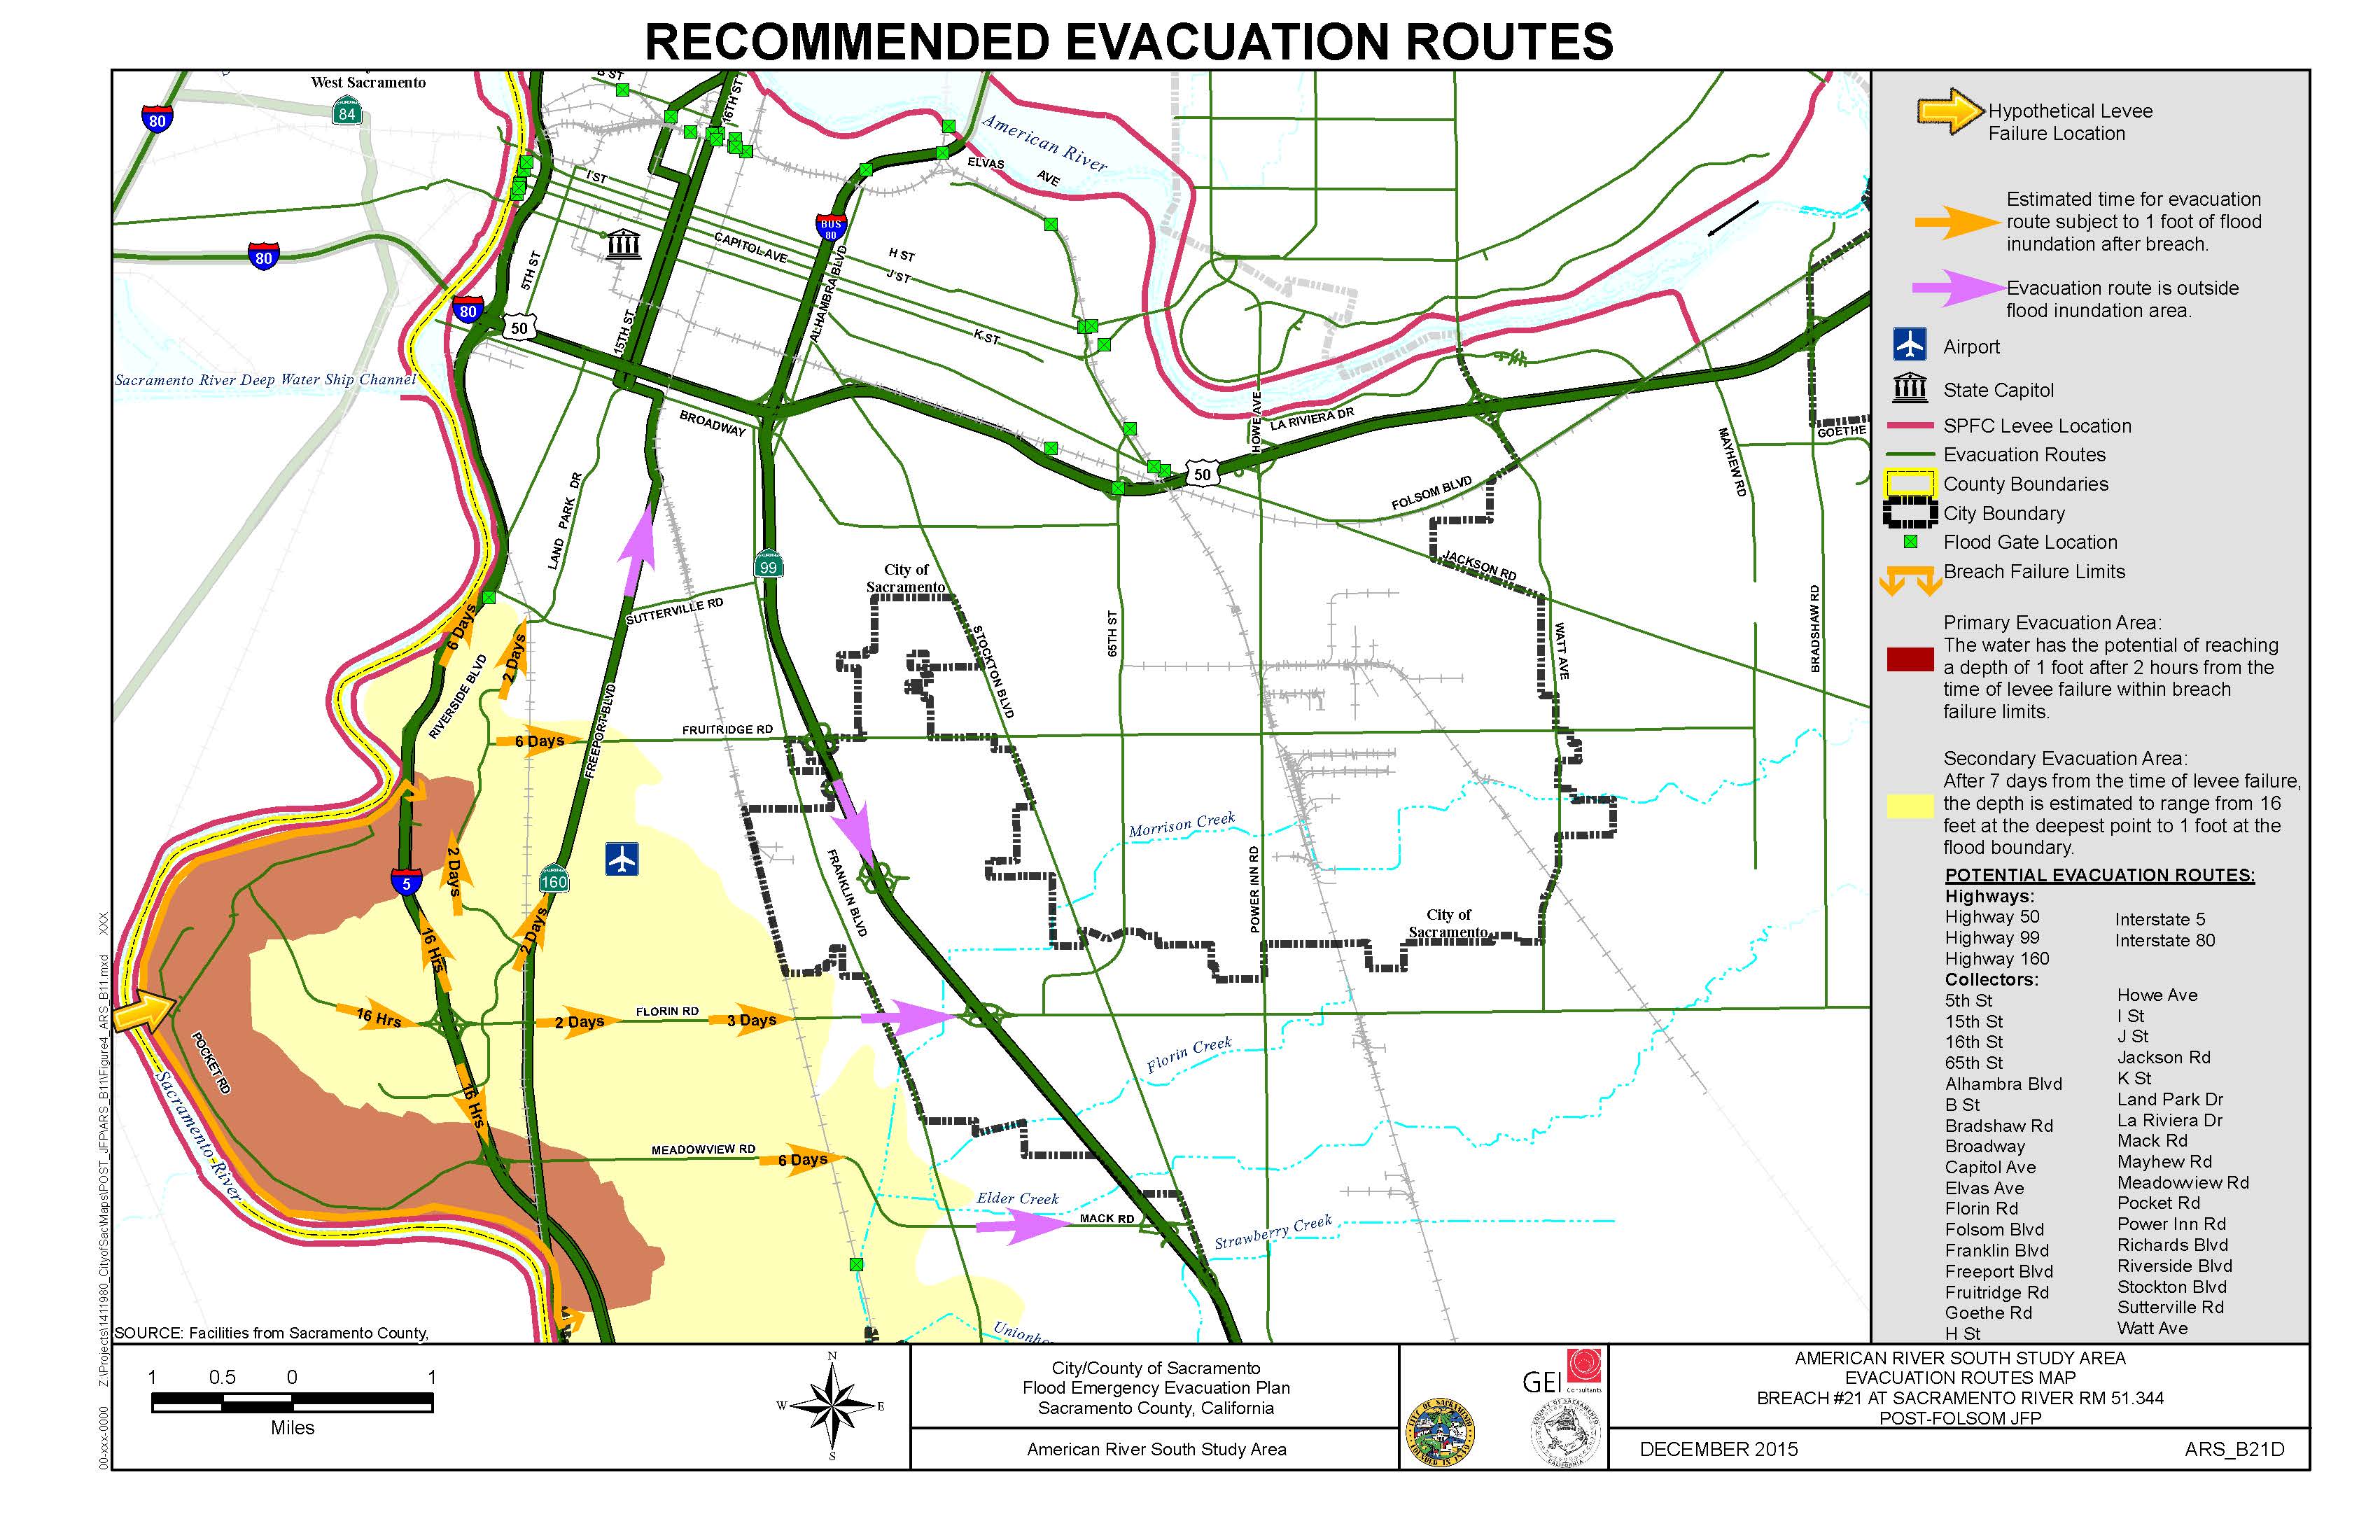 This map highlights the possible evacuation routes if there is a breach.